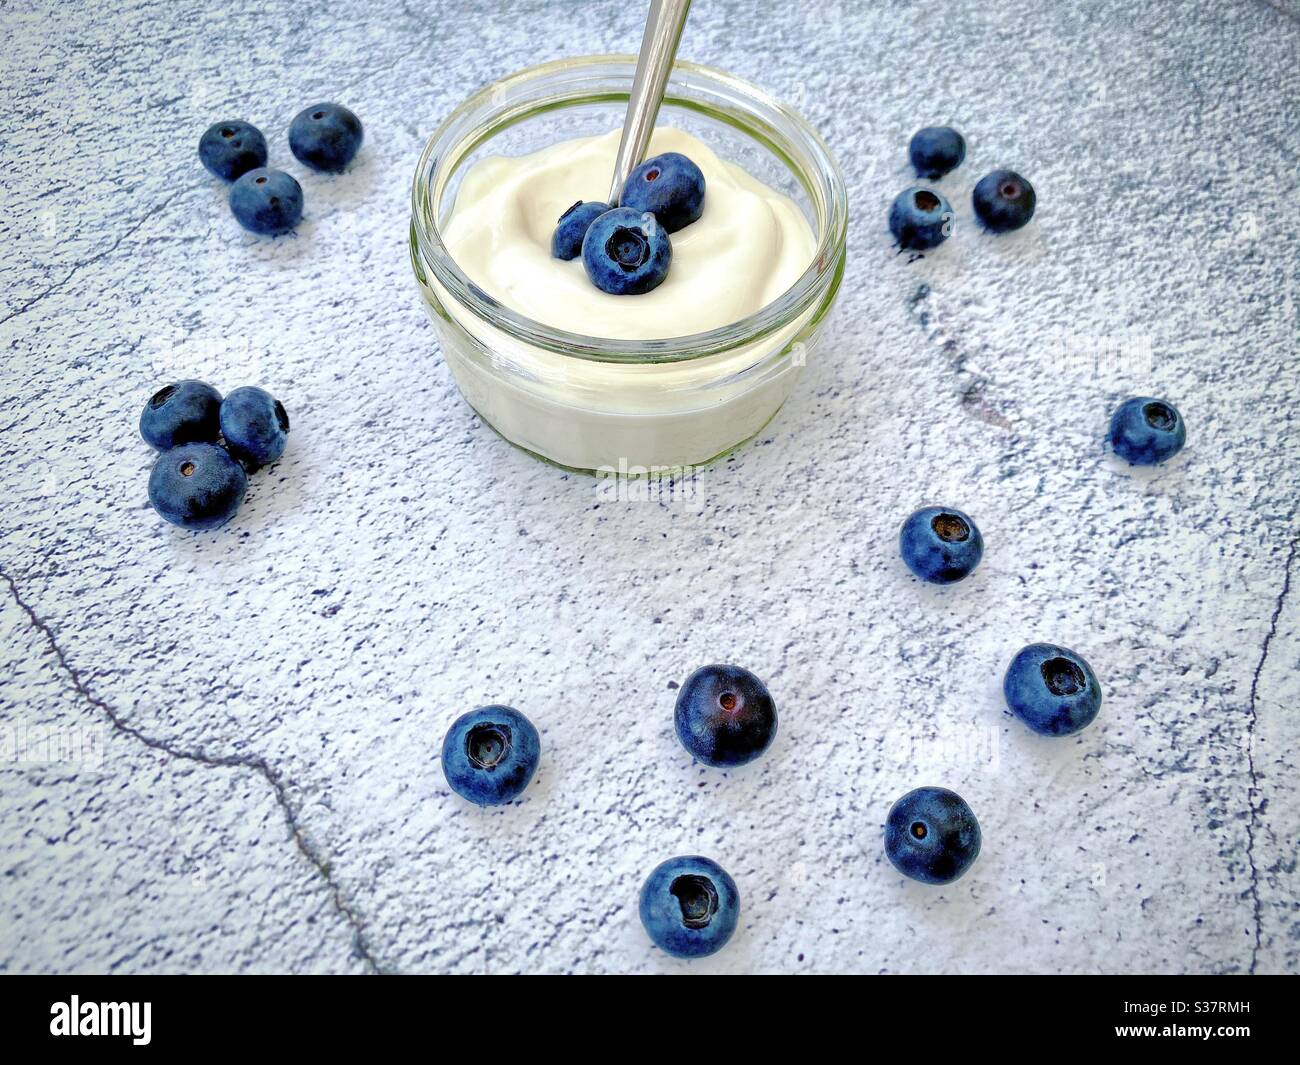 Fresh blueberries and yogurt against a natural stone granite textured background. Healthy summer berries full of antioxidants. Food on the kitchen counter. Stock Photo